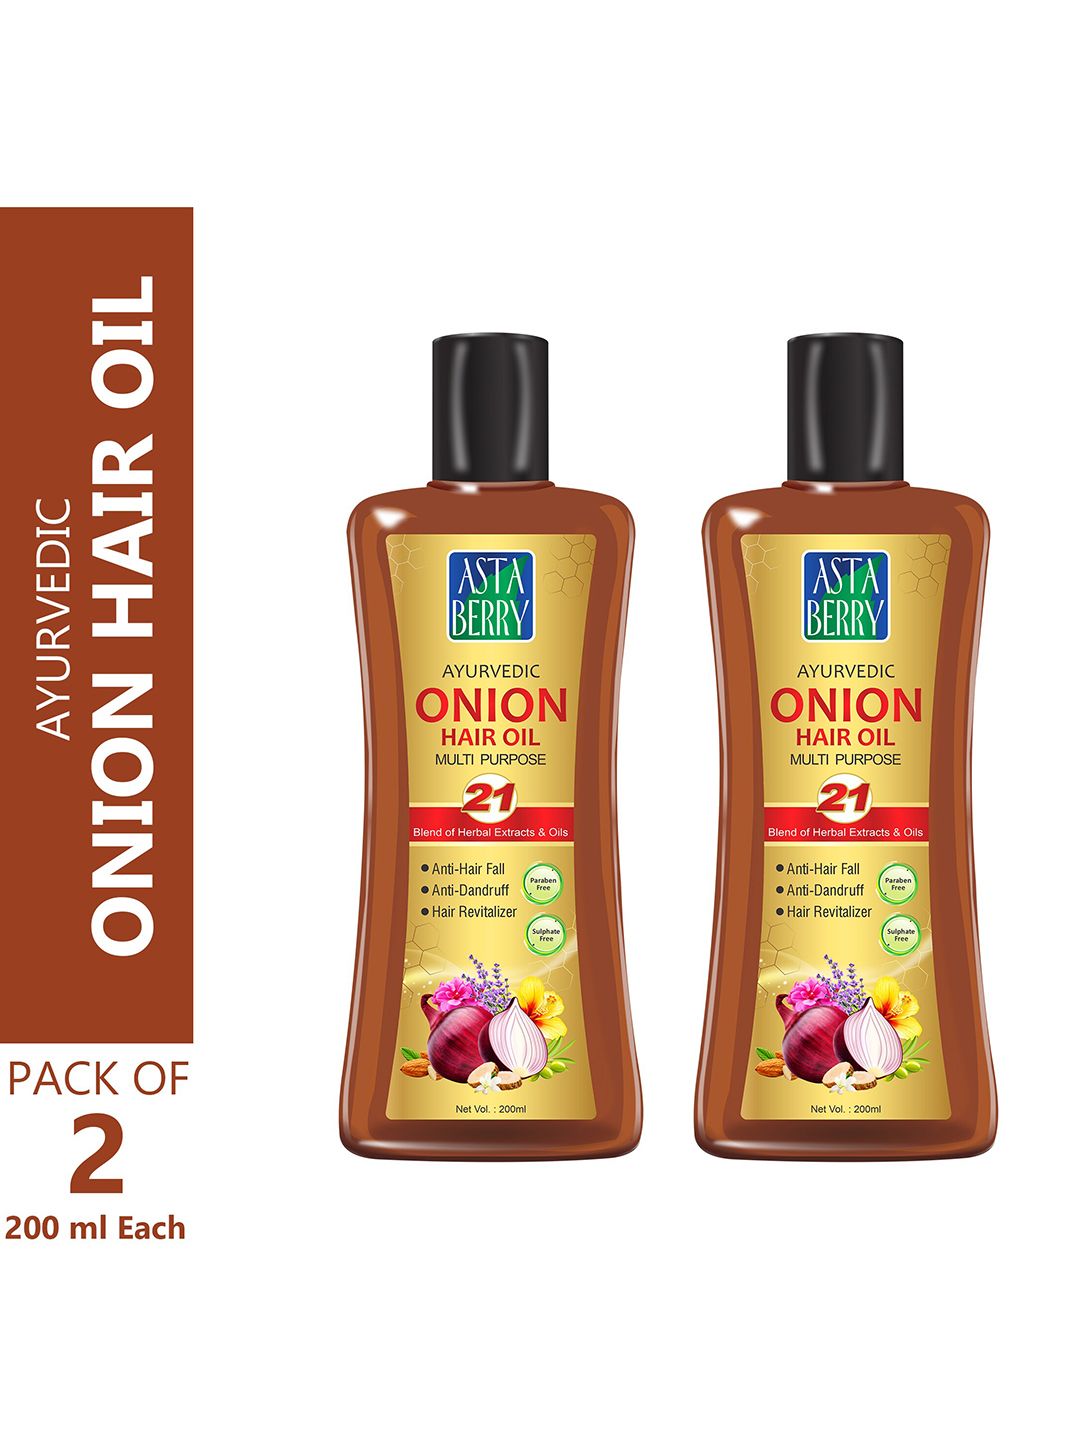 Astaberry Unisex Pack of 2 Onion Hair Oil- 400ml Price in India